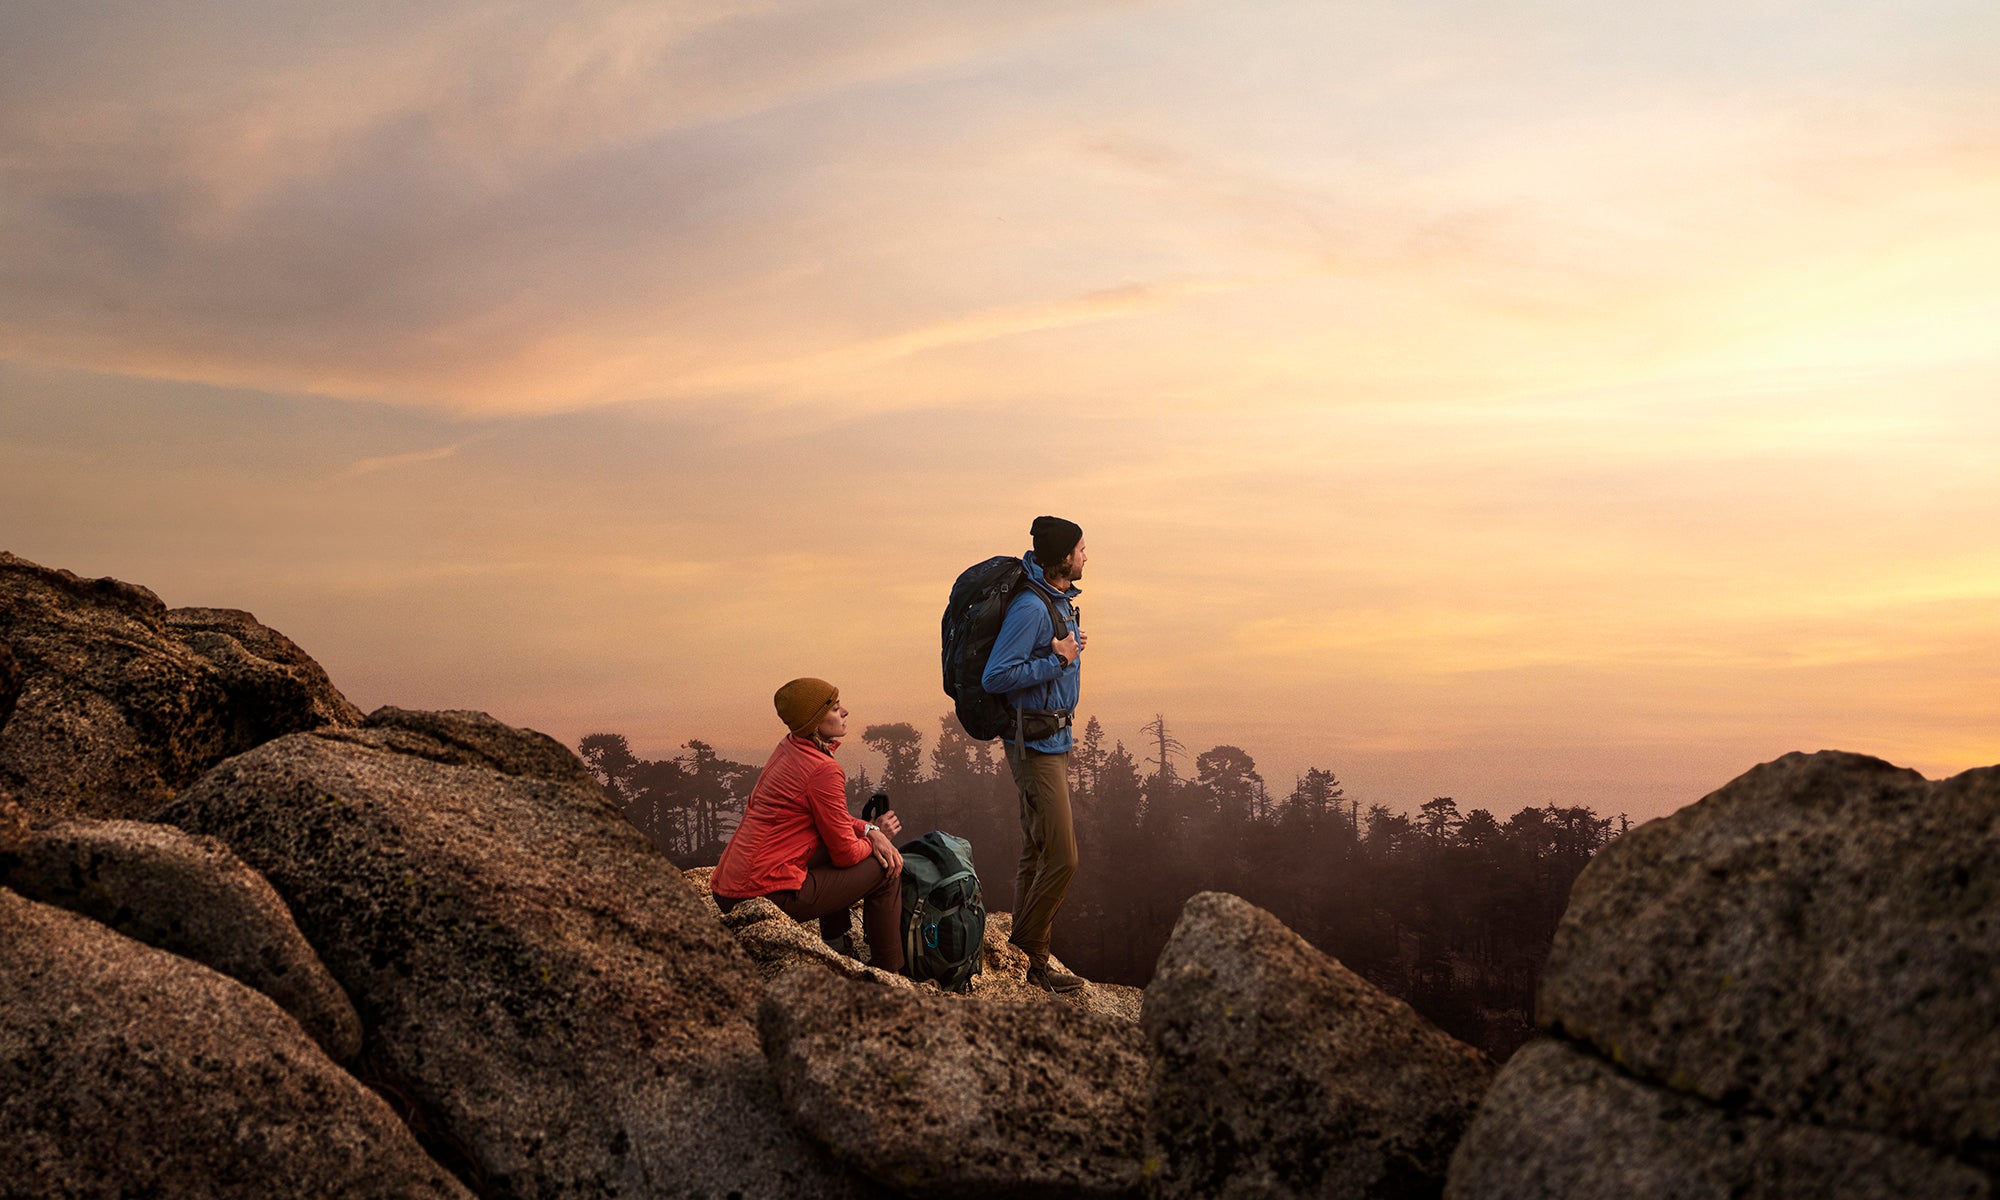 Two hikers with backpacks watching the sunset on a rocky cliff with